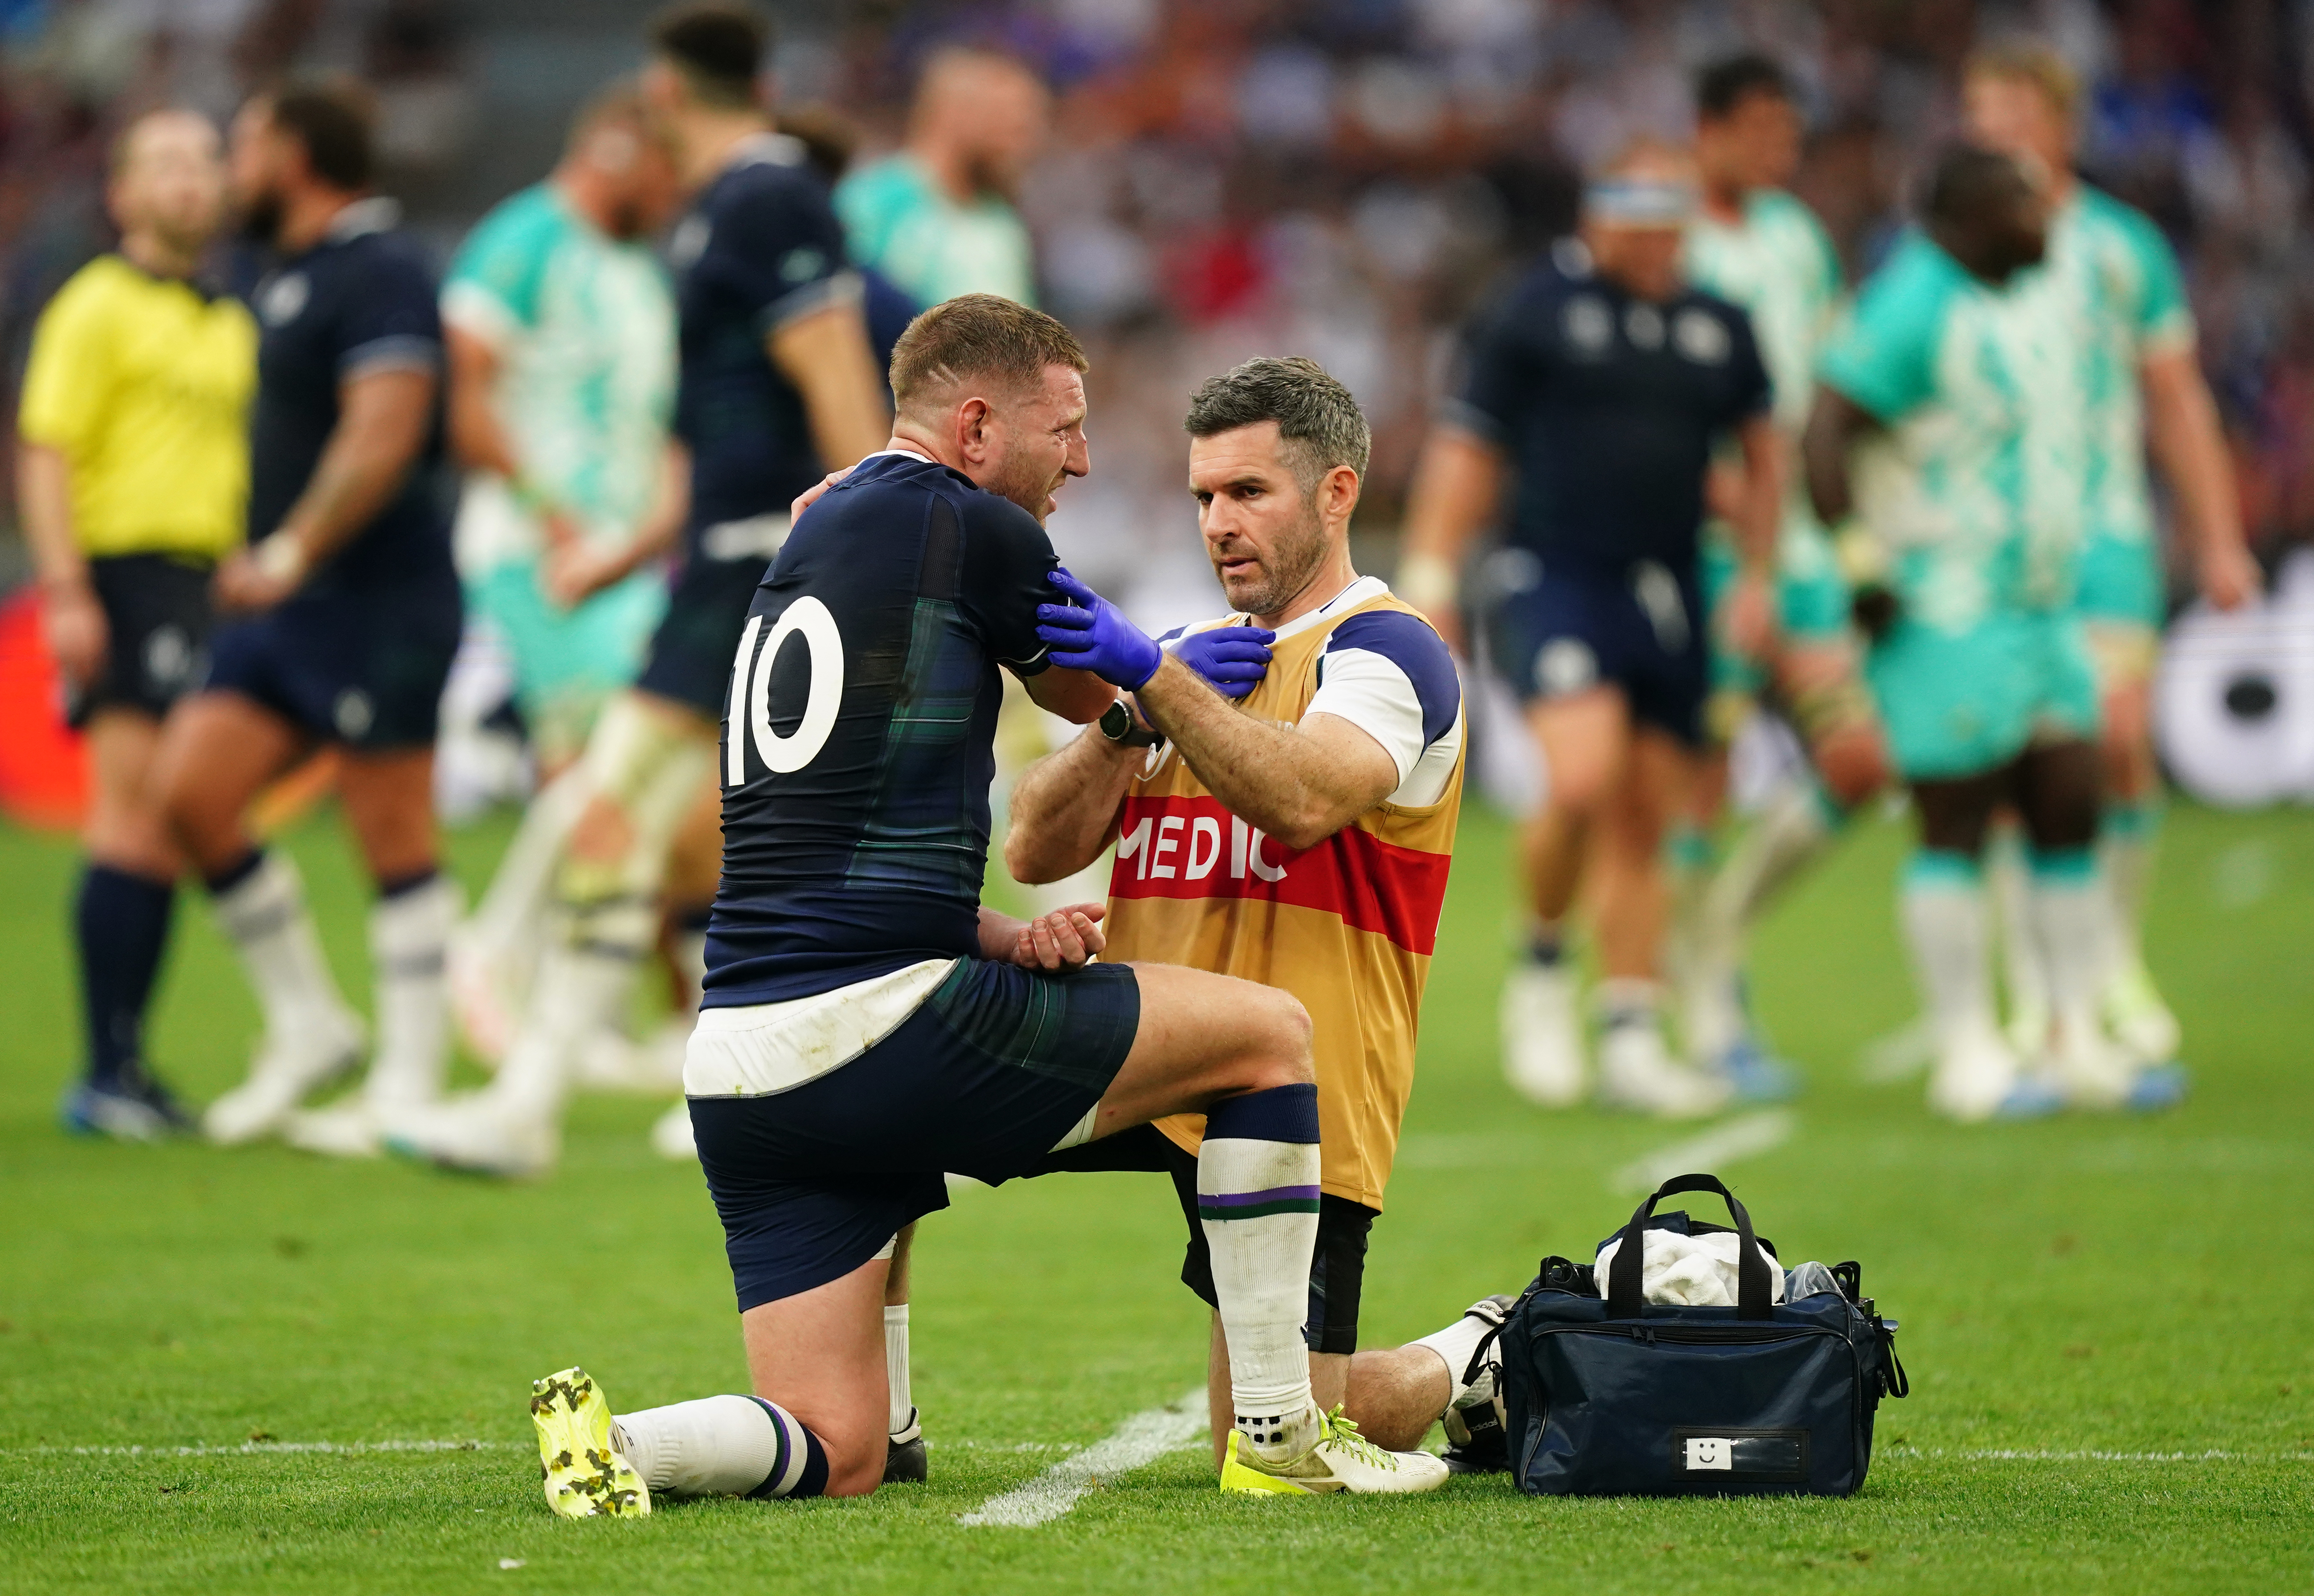 Finn Russell trained on Thursday after a couple of heavy blows against South Africa